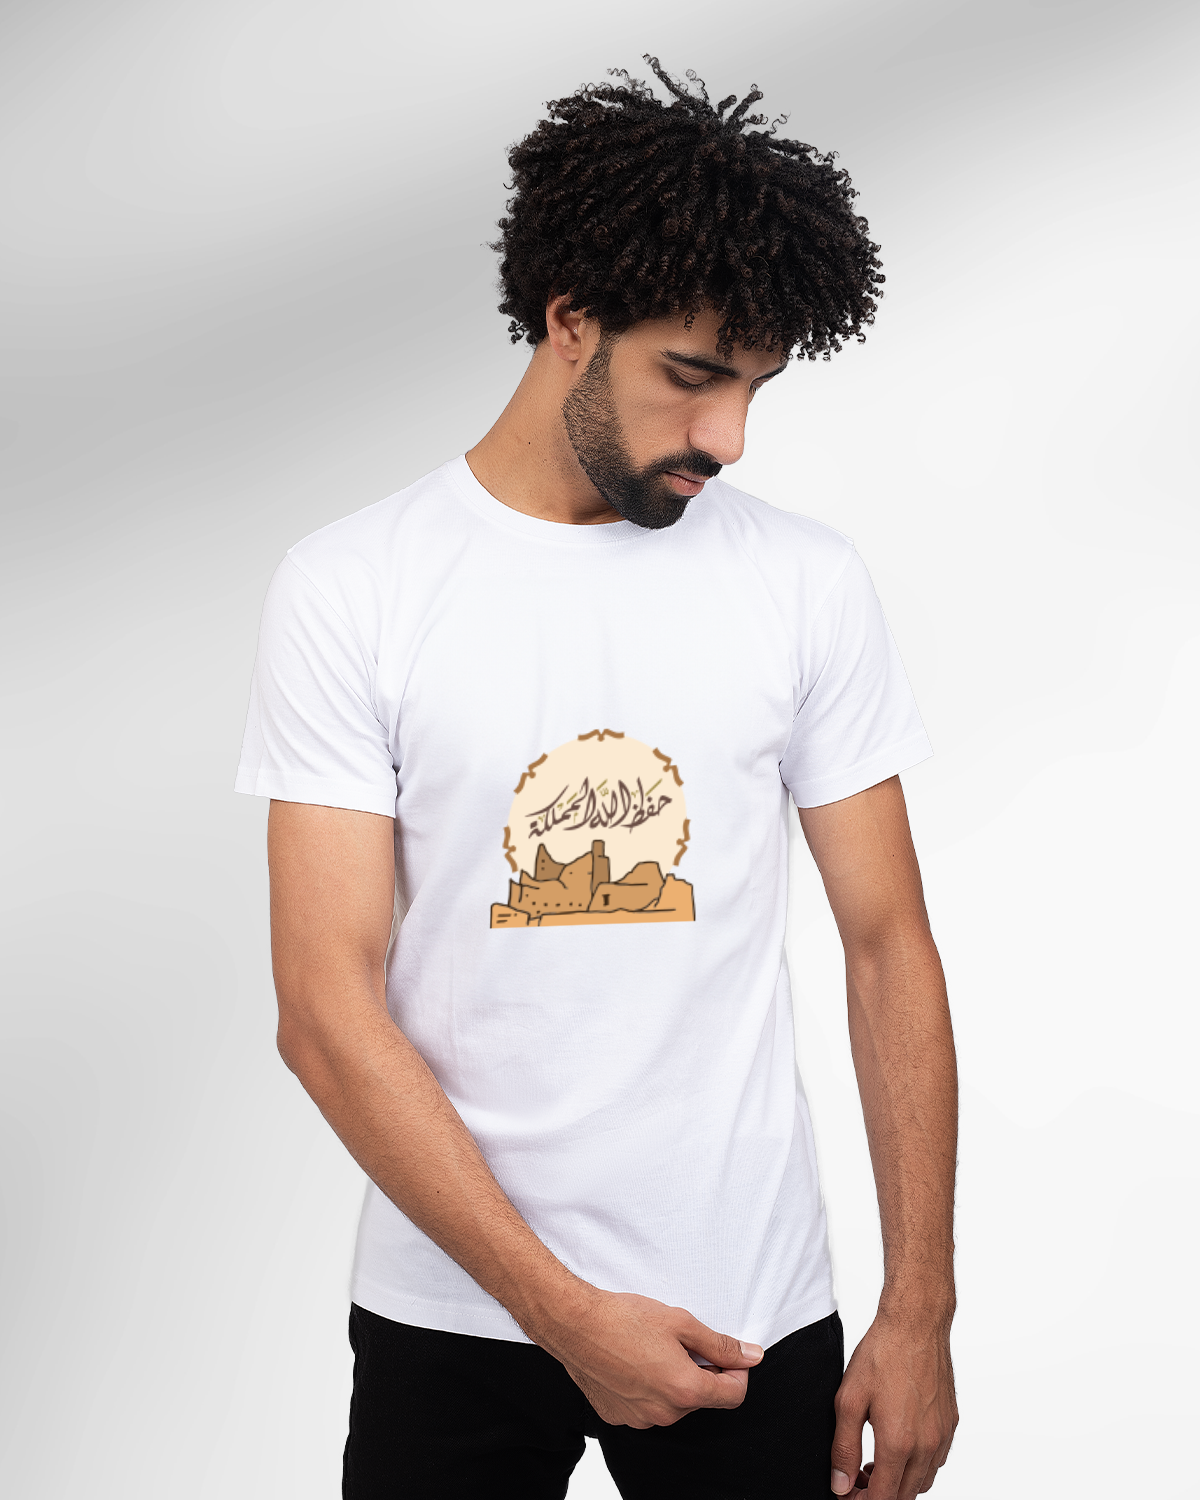 Men's Foundation Day T-shirt (May Allah Protect the Kingdom)